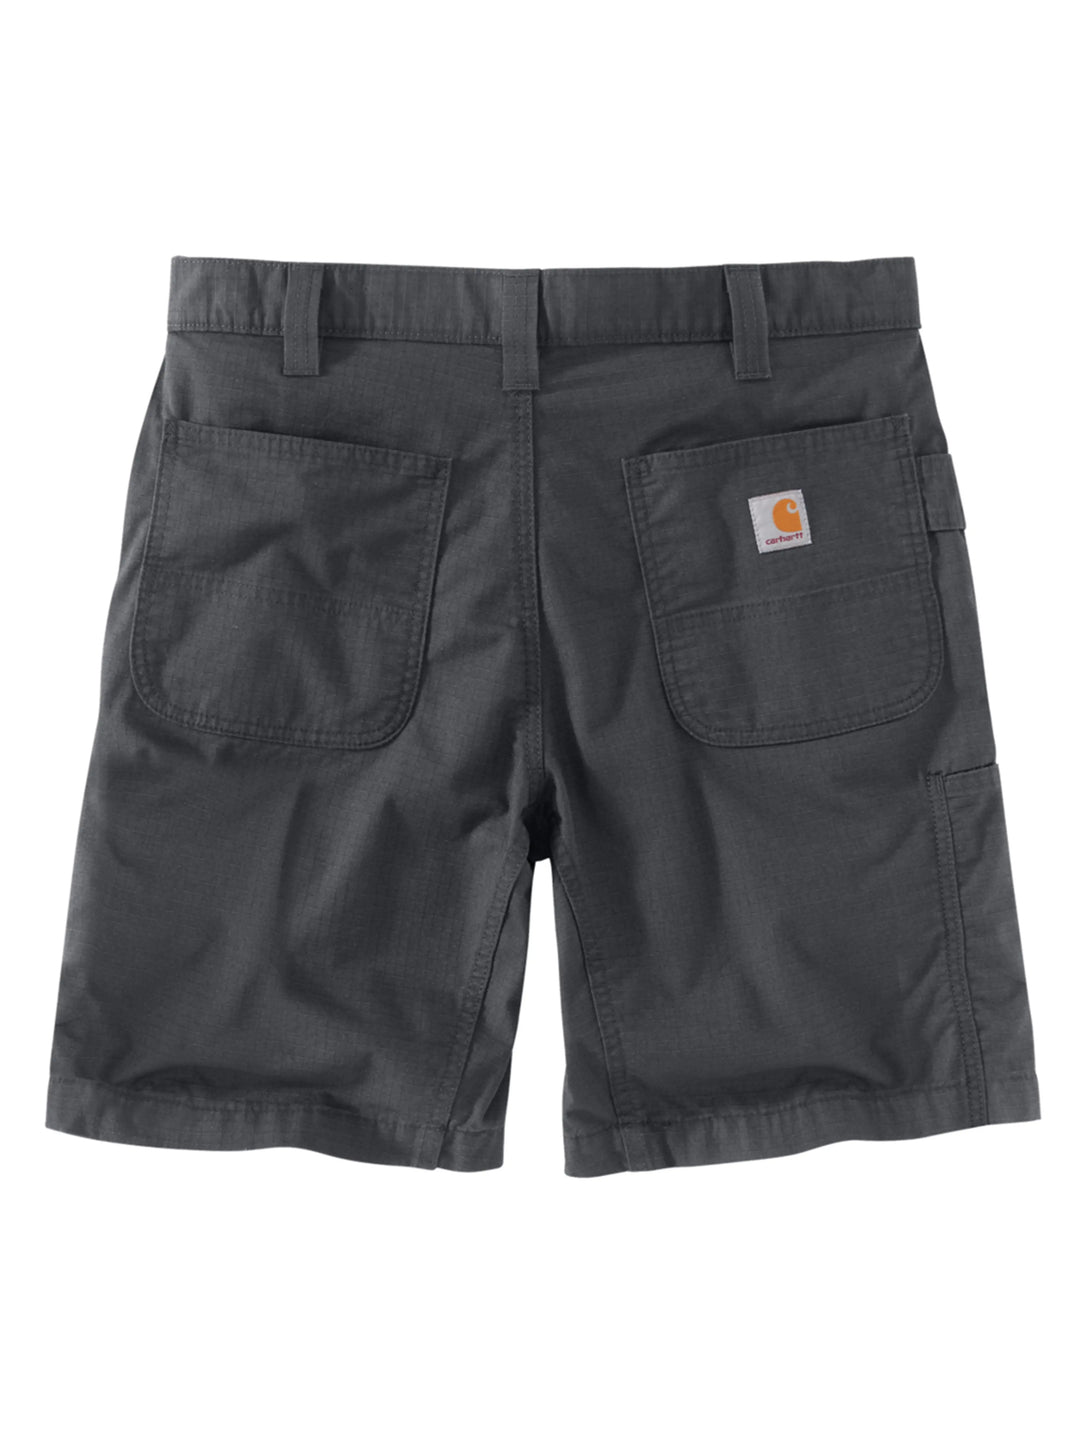 Carhartt Force Relaxed Fit Ripstop Work Short 8.5 Inch Shadow Prior